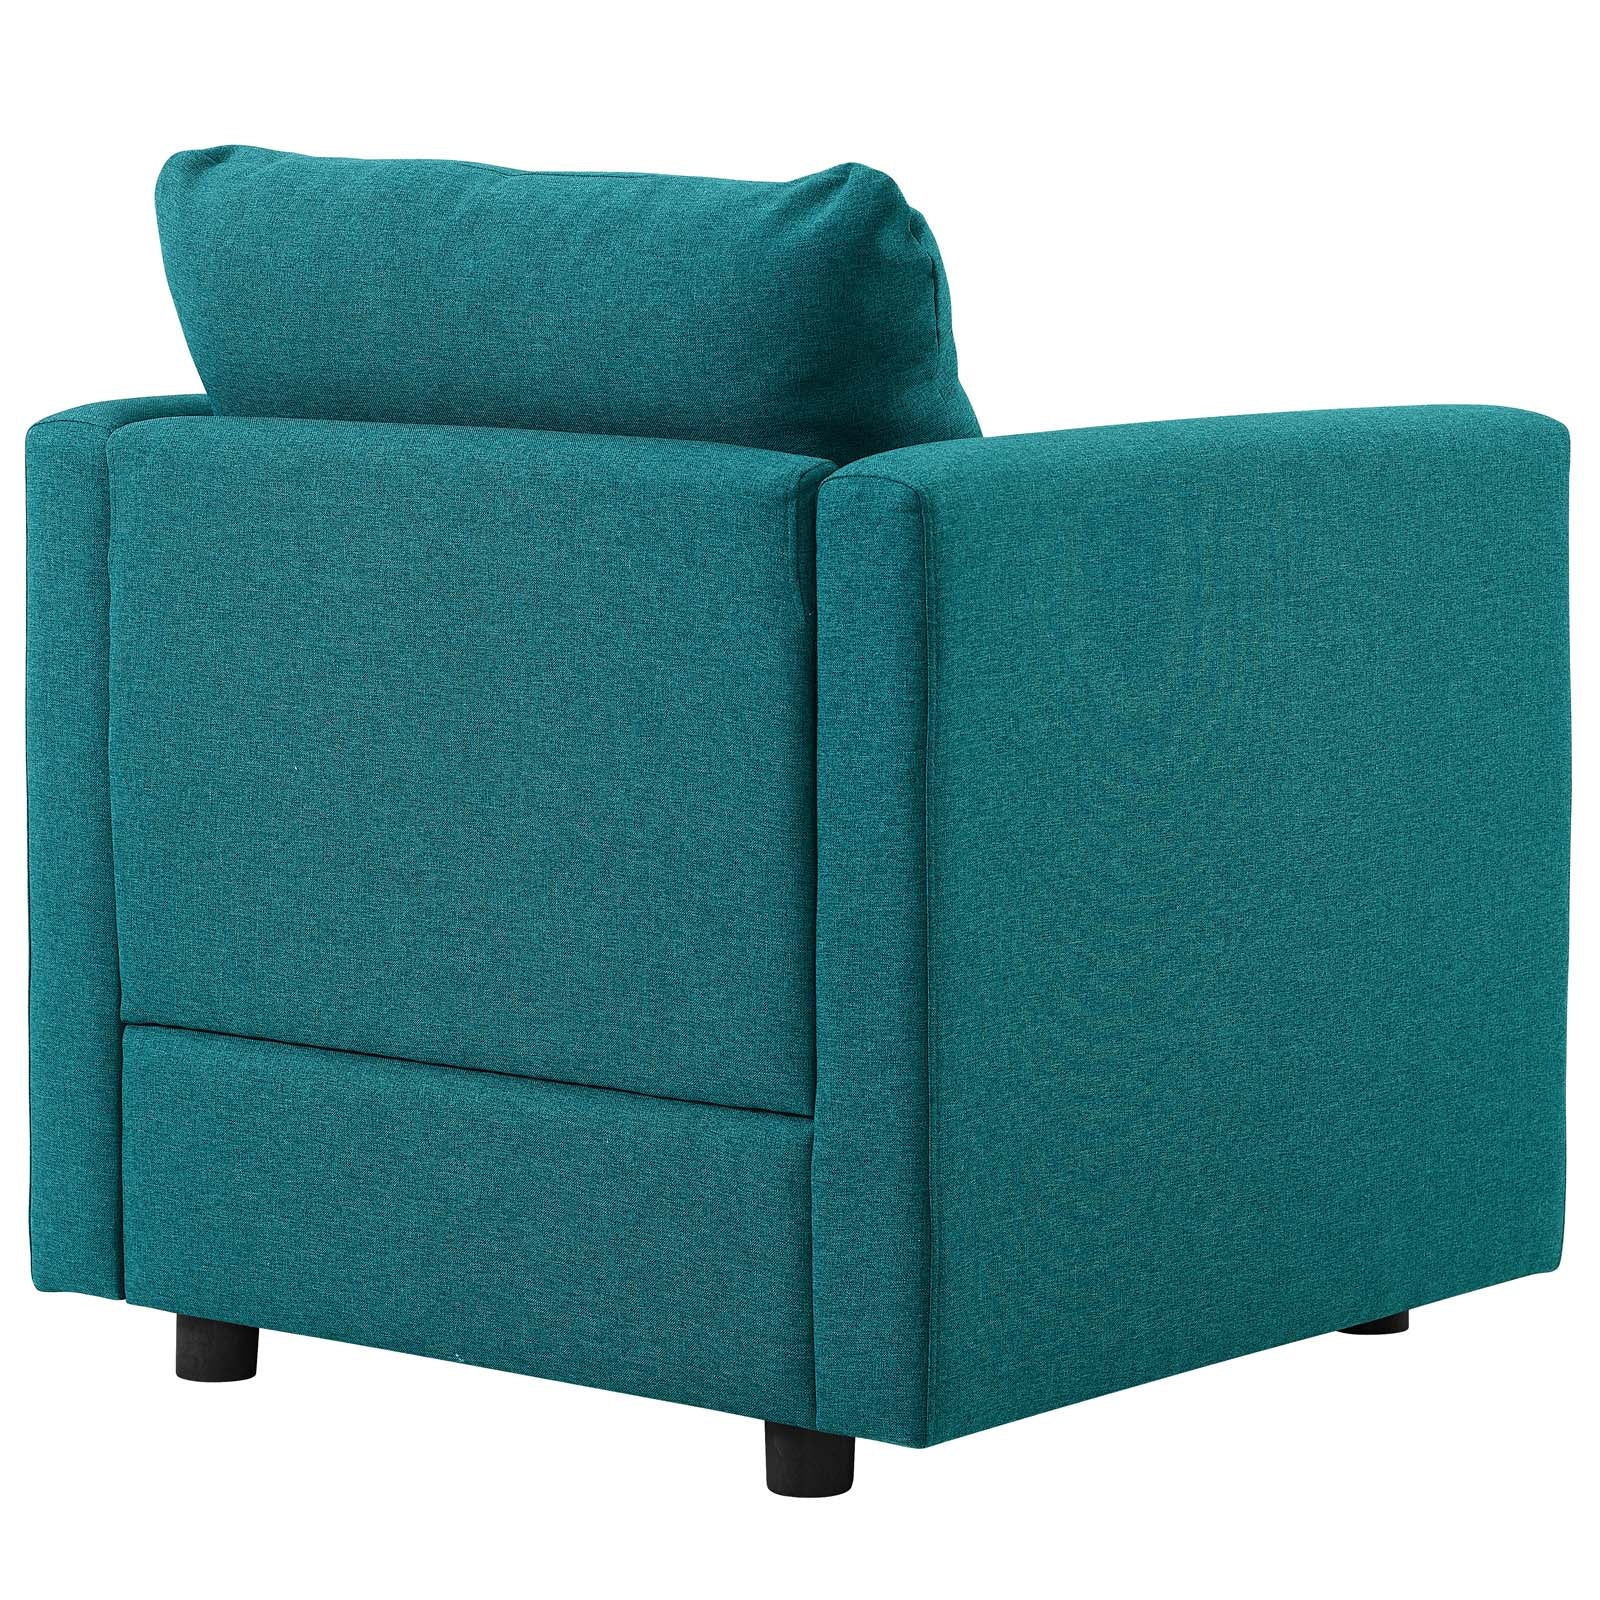 Activate Upholstered Fabric Armchair - East Shore Modern Home Furnishings